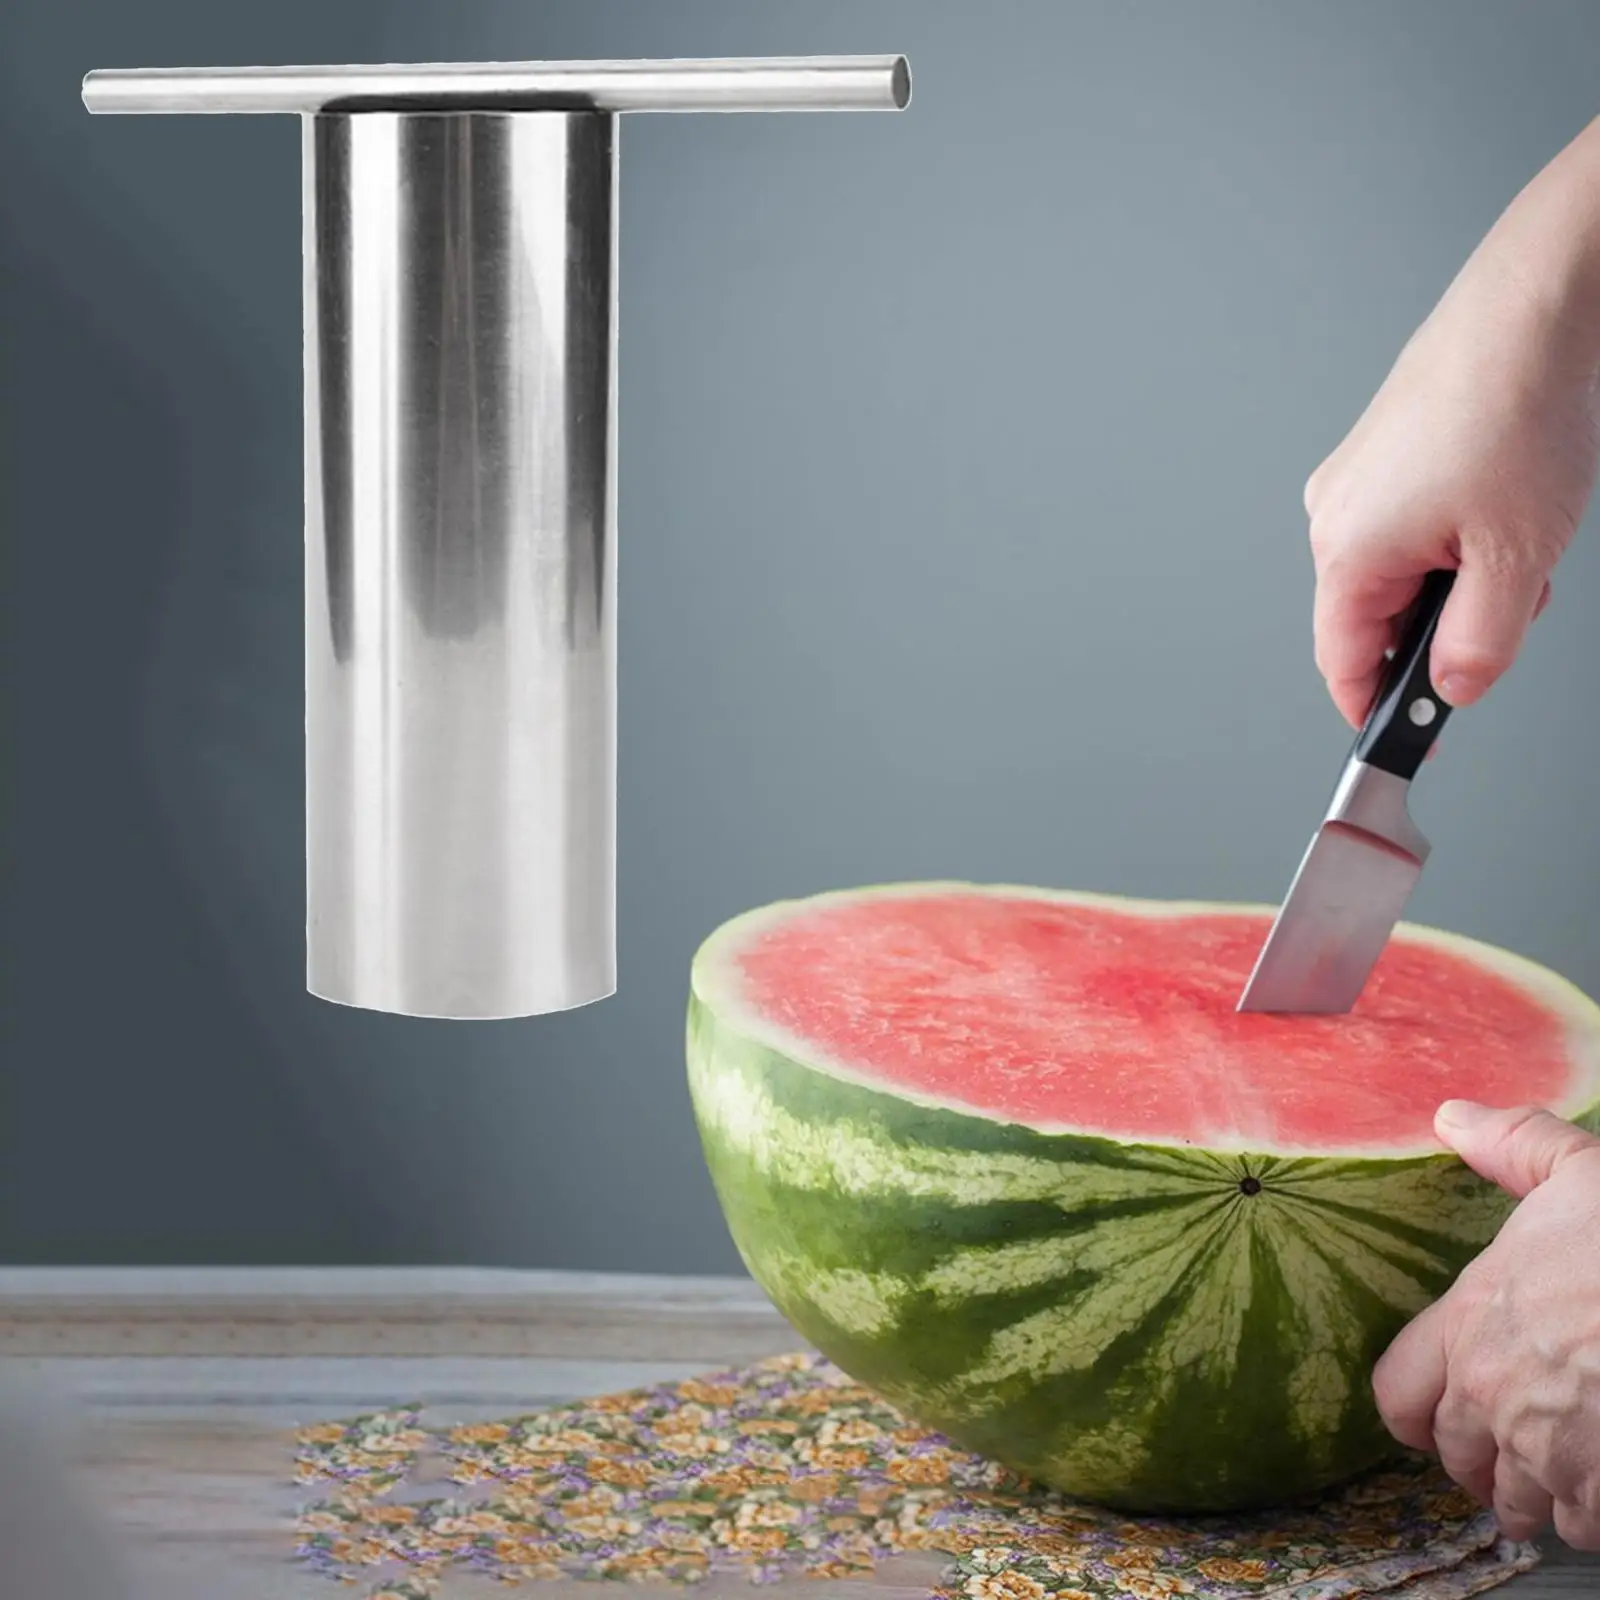 Watermelon Core Remover Kitchen Corer Tool Easy Coring Kitchen Gadgets Melon Slicer Melon Opener for for Fruits Vegetable Tool